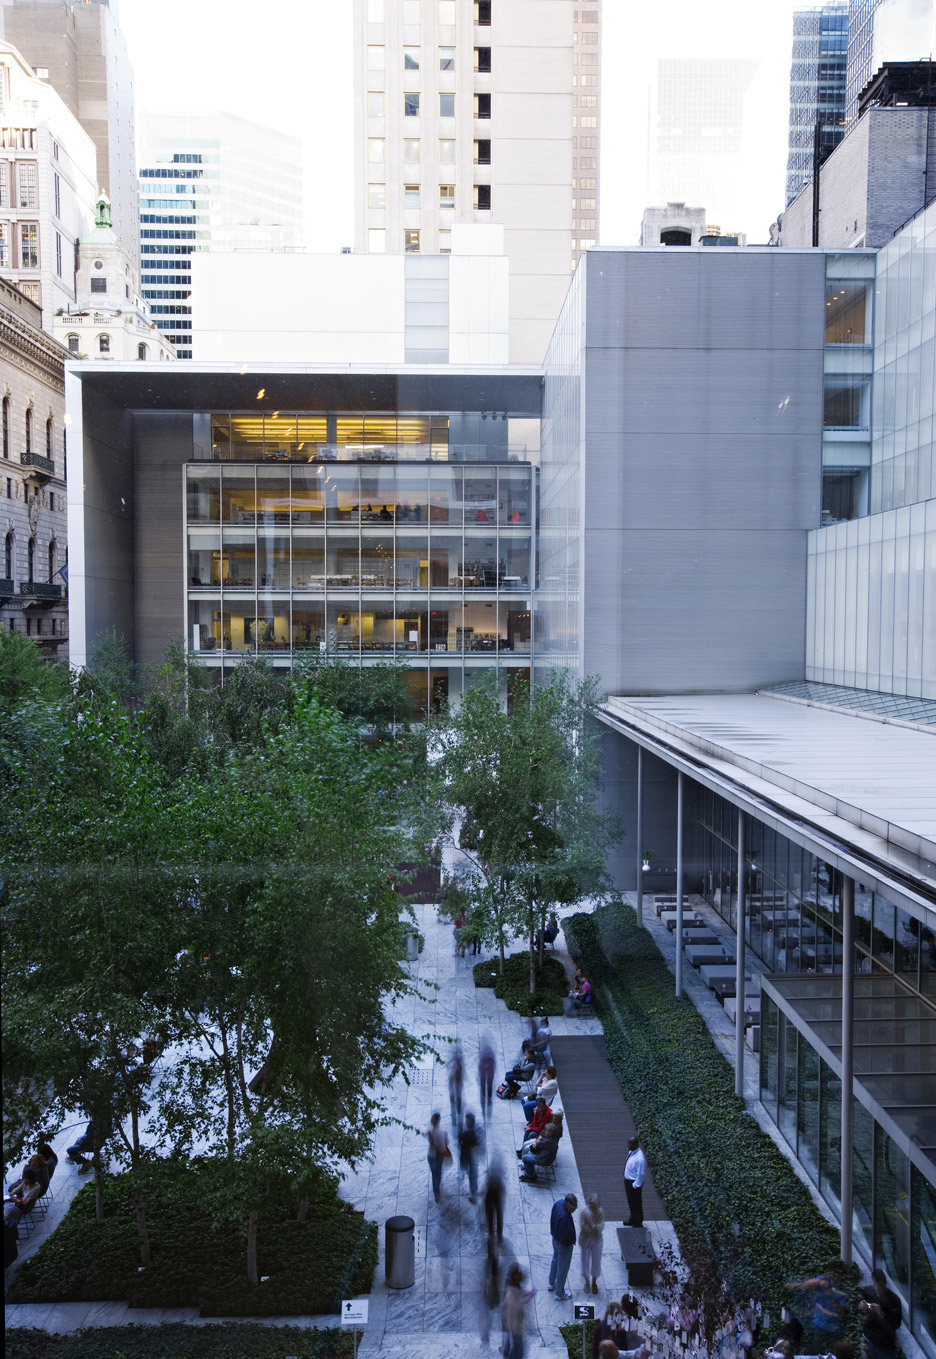 MoMa expansion by Diller Scofidio + Renfro in New York